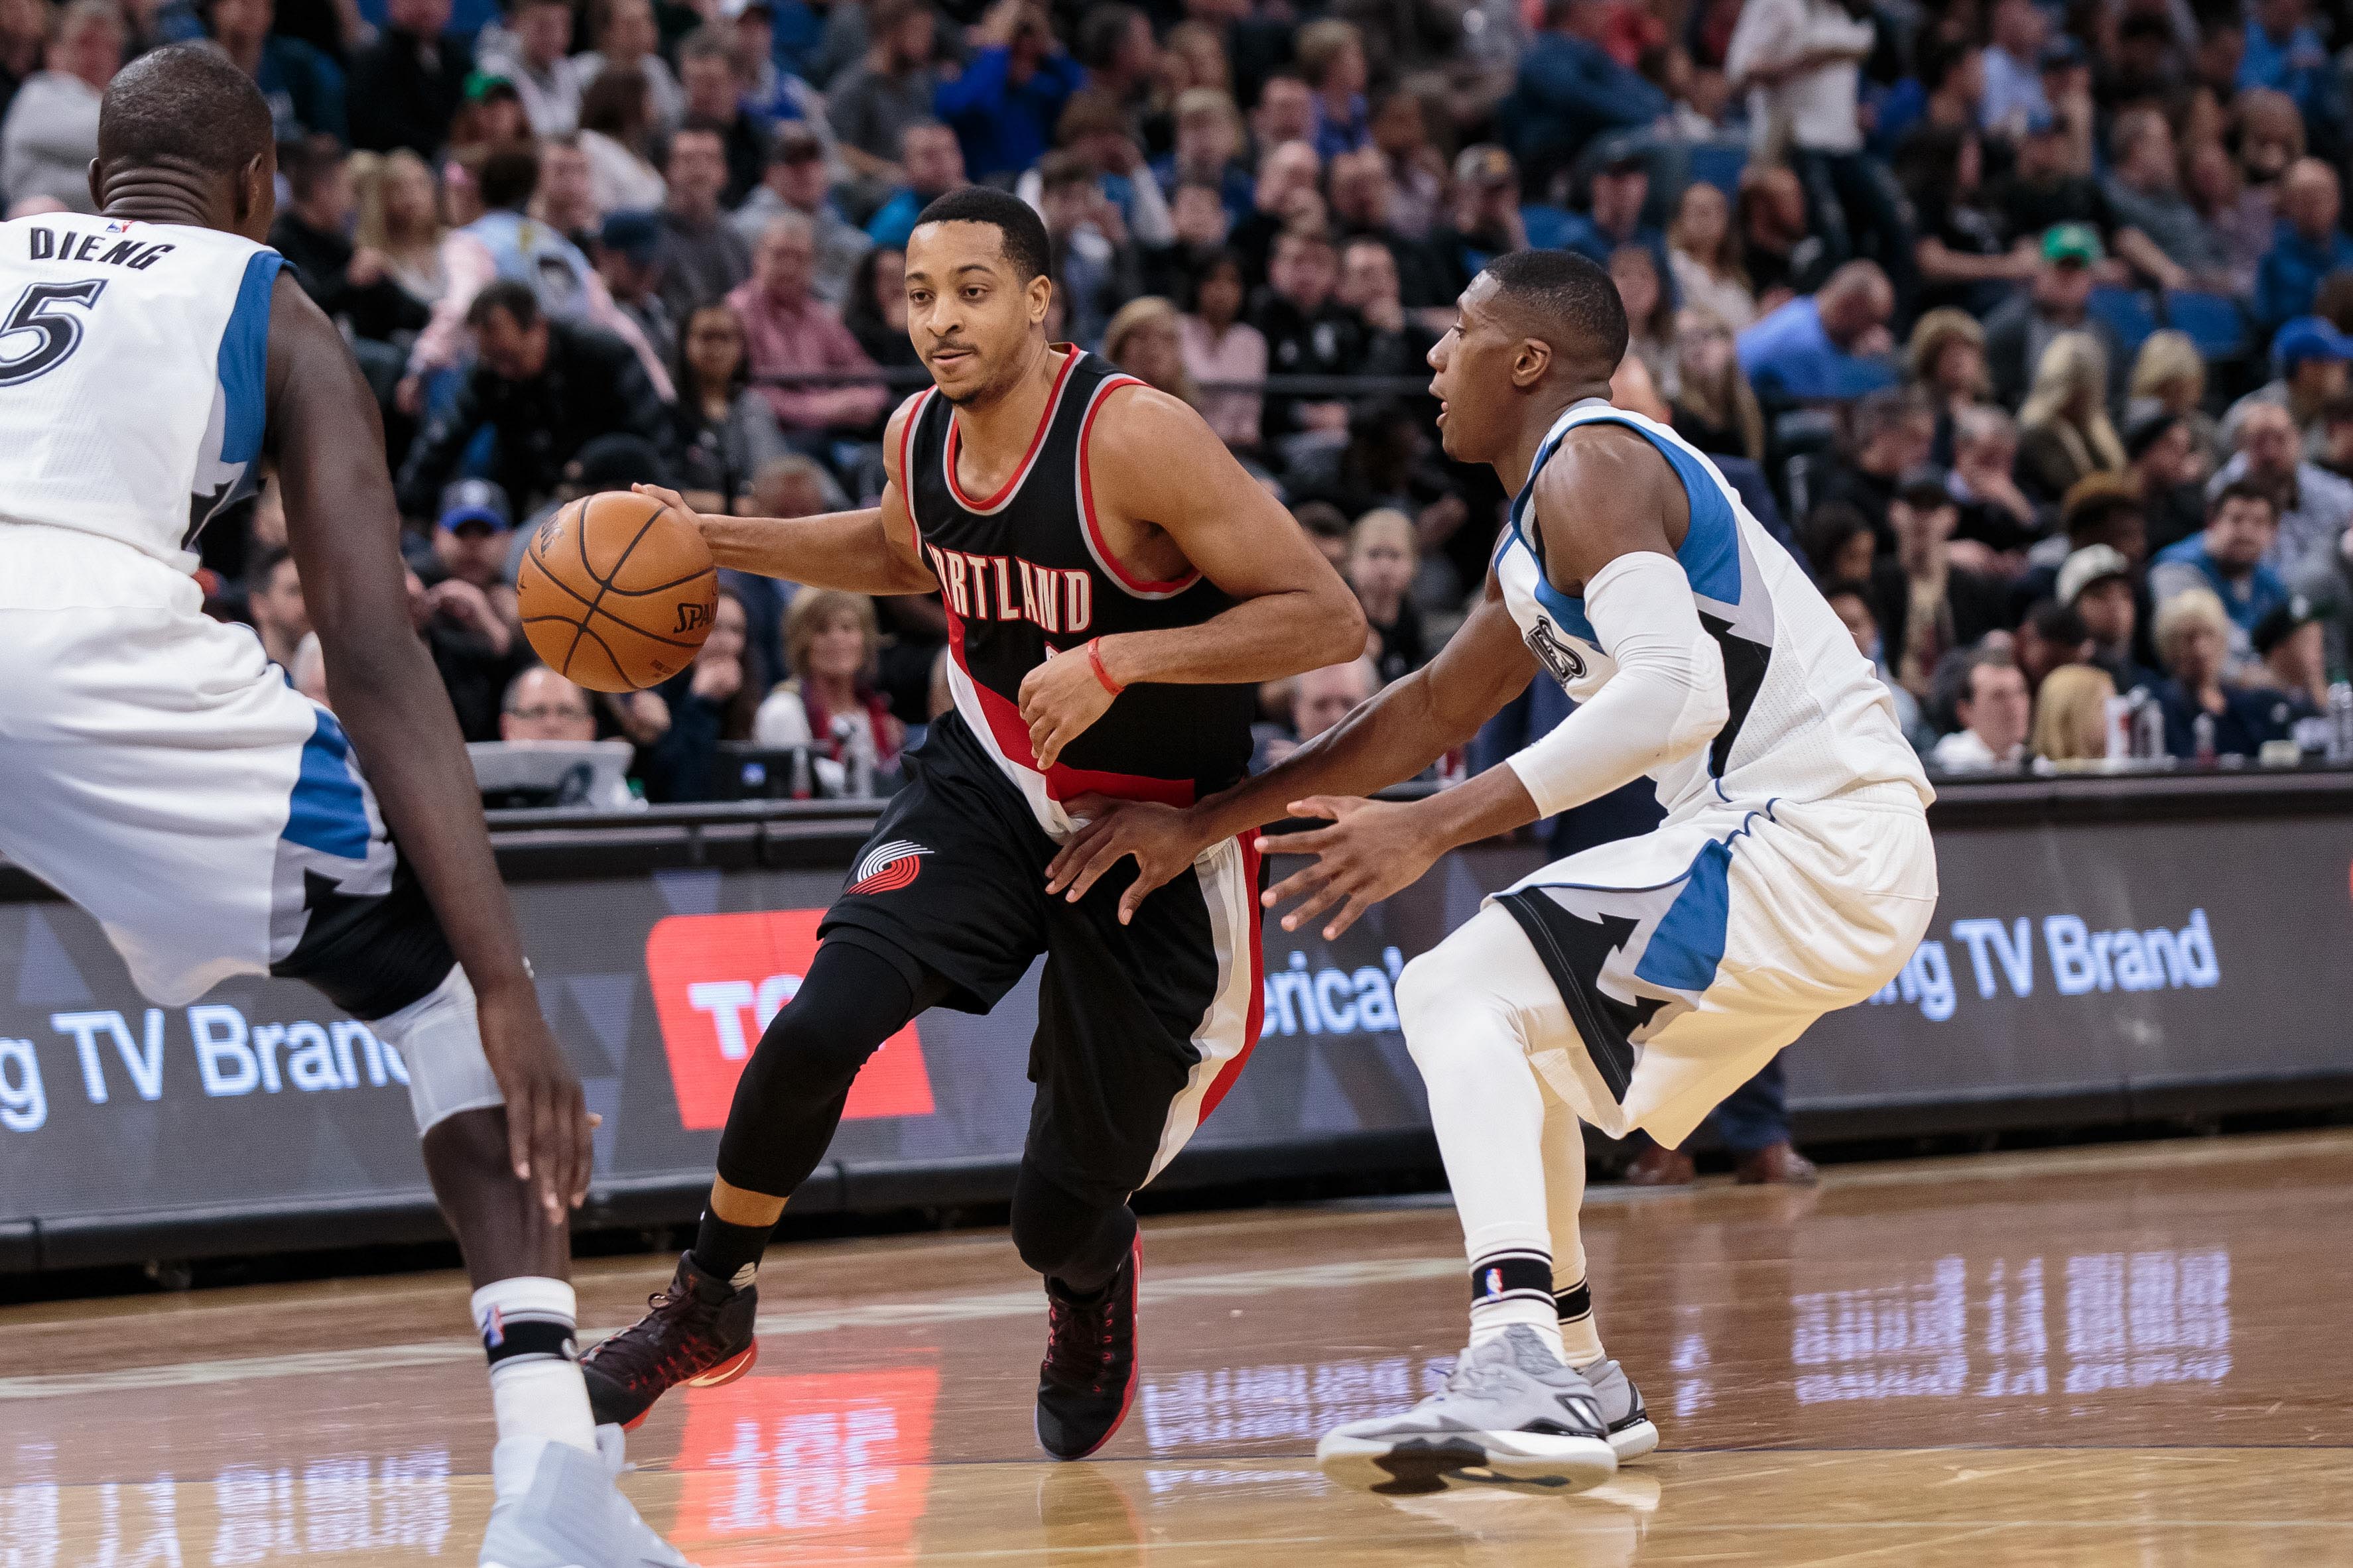 Timberwolves at Trail Blazers live stream: How to watch online